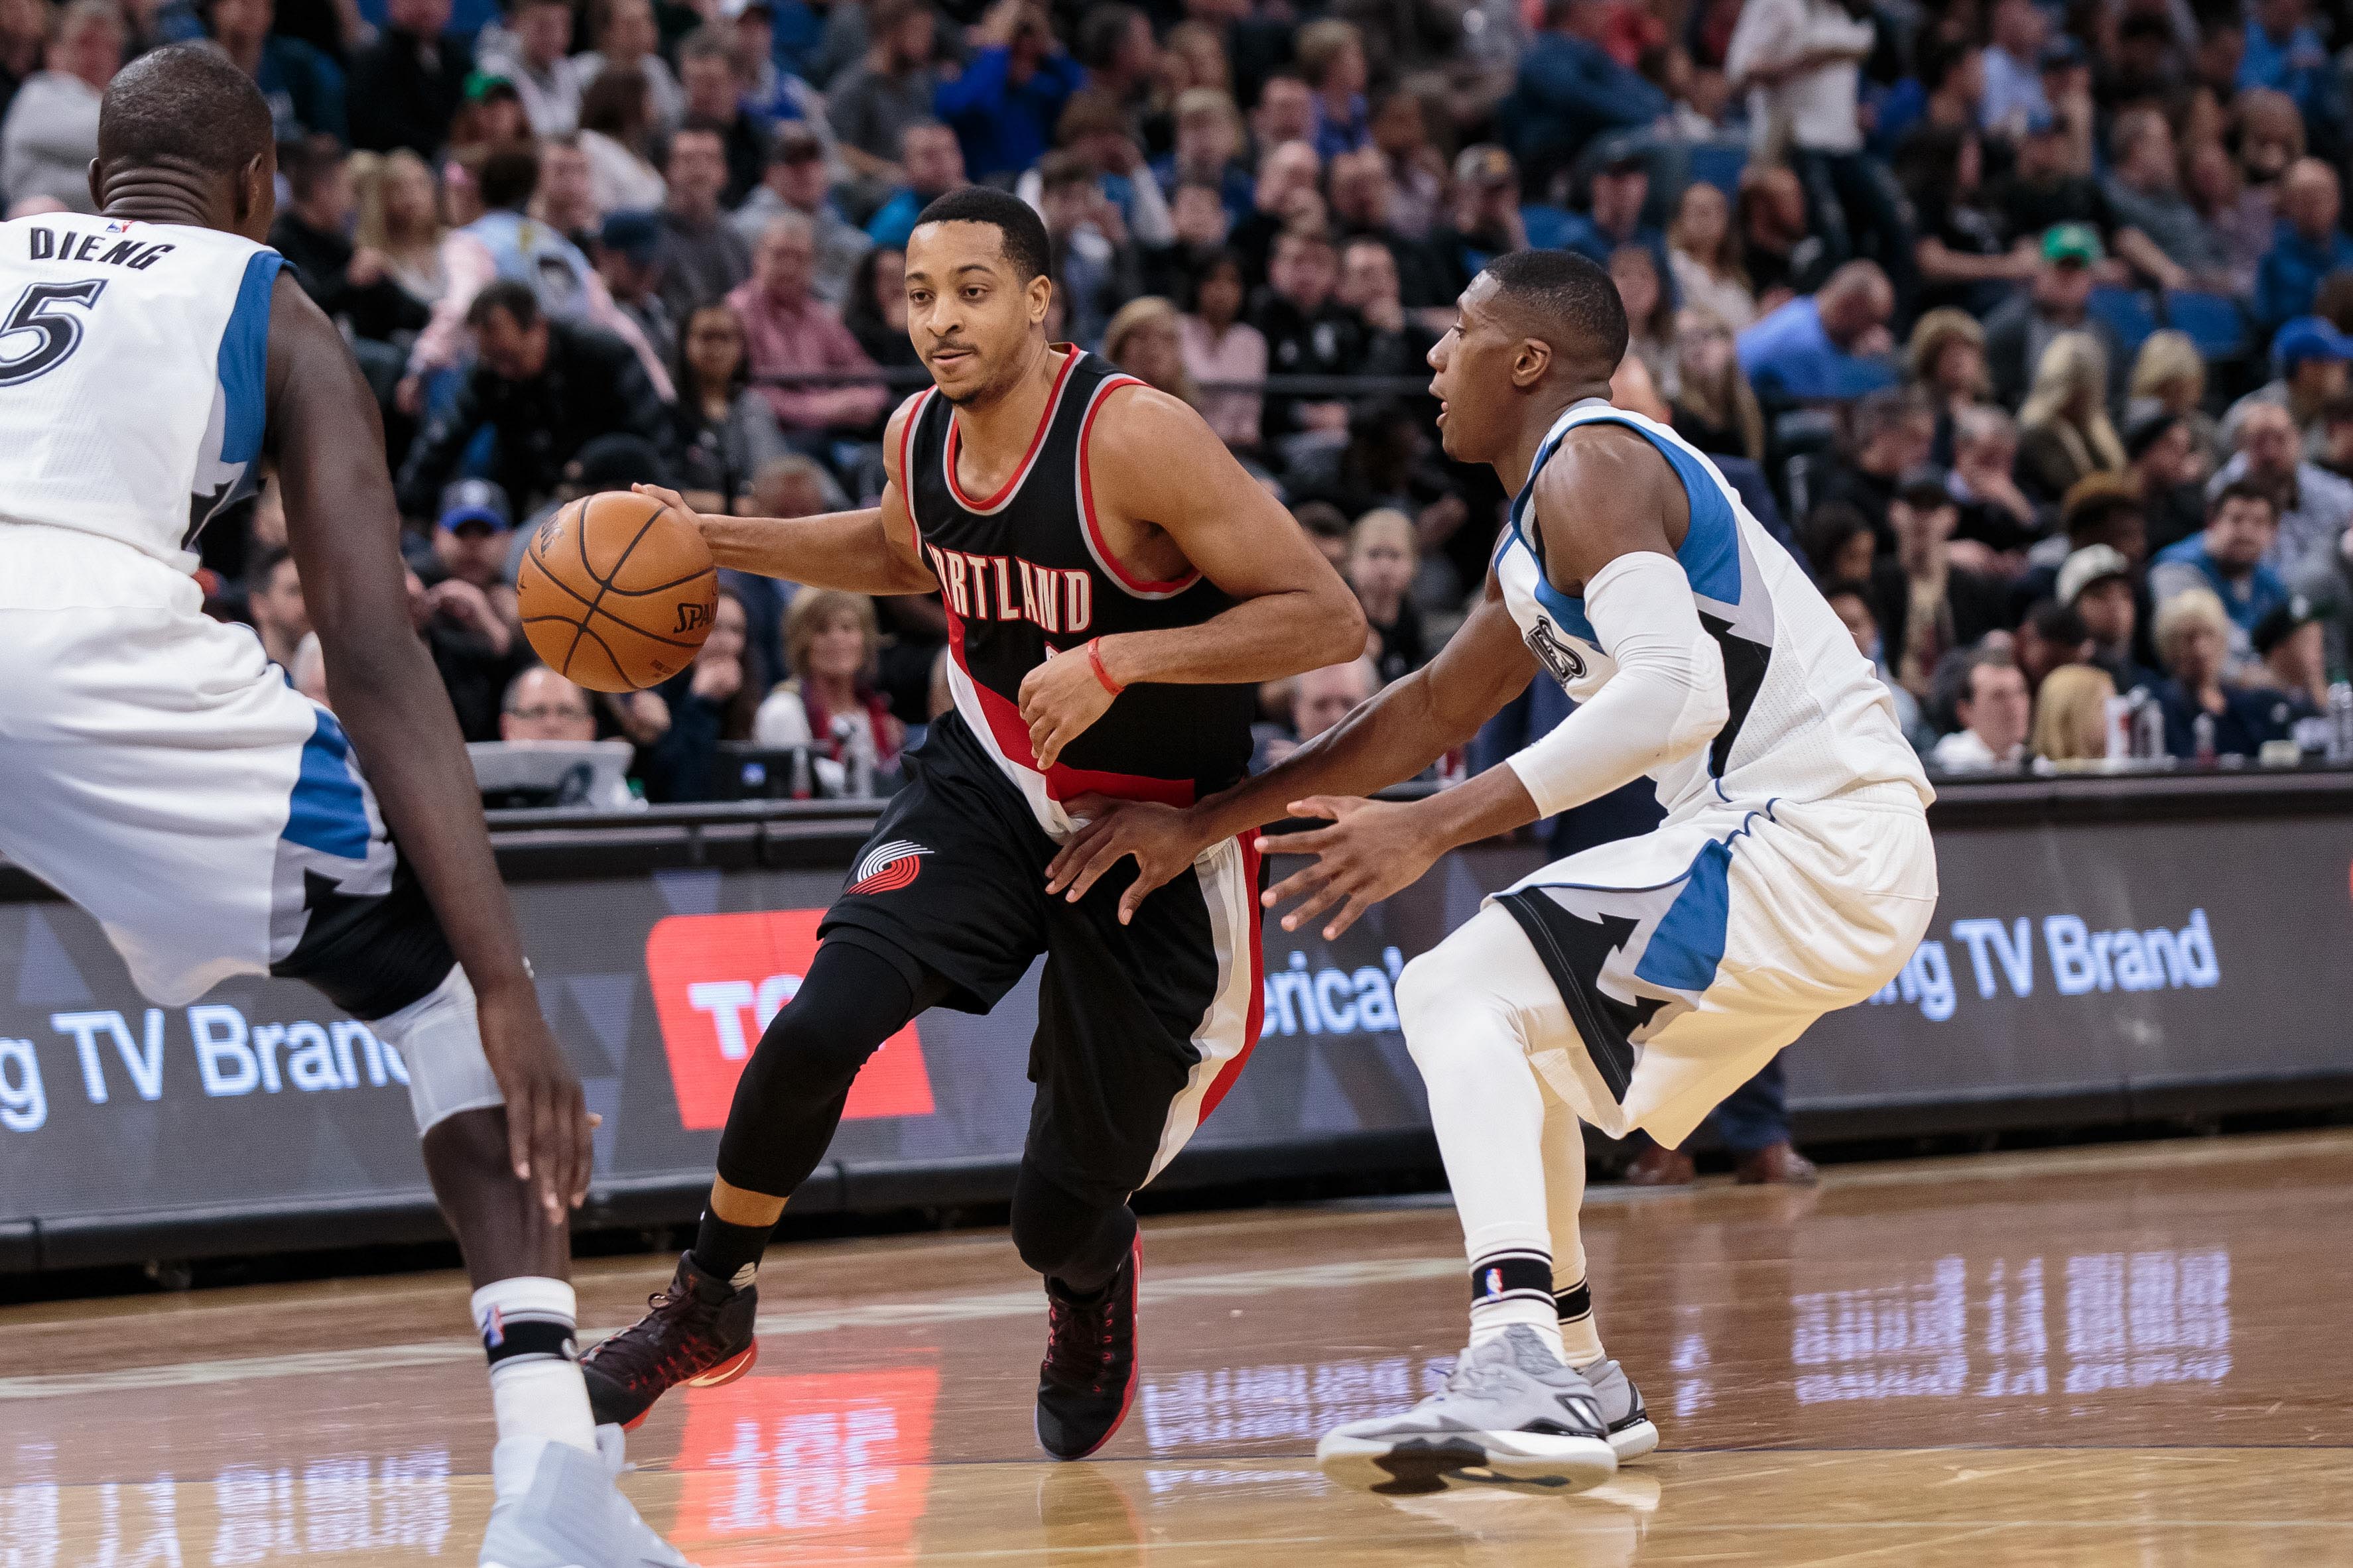 Timberwolves at Trail Blazers live stream: How to watch online